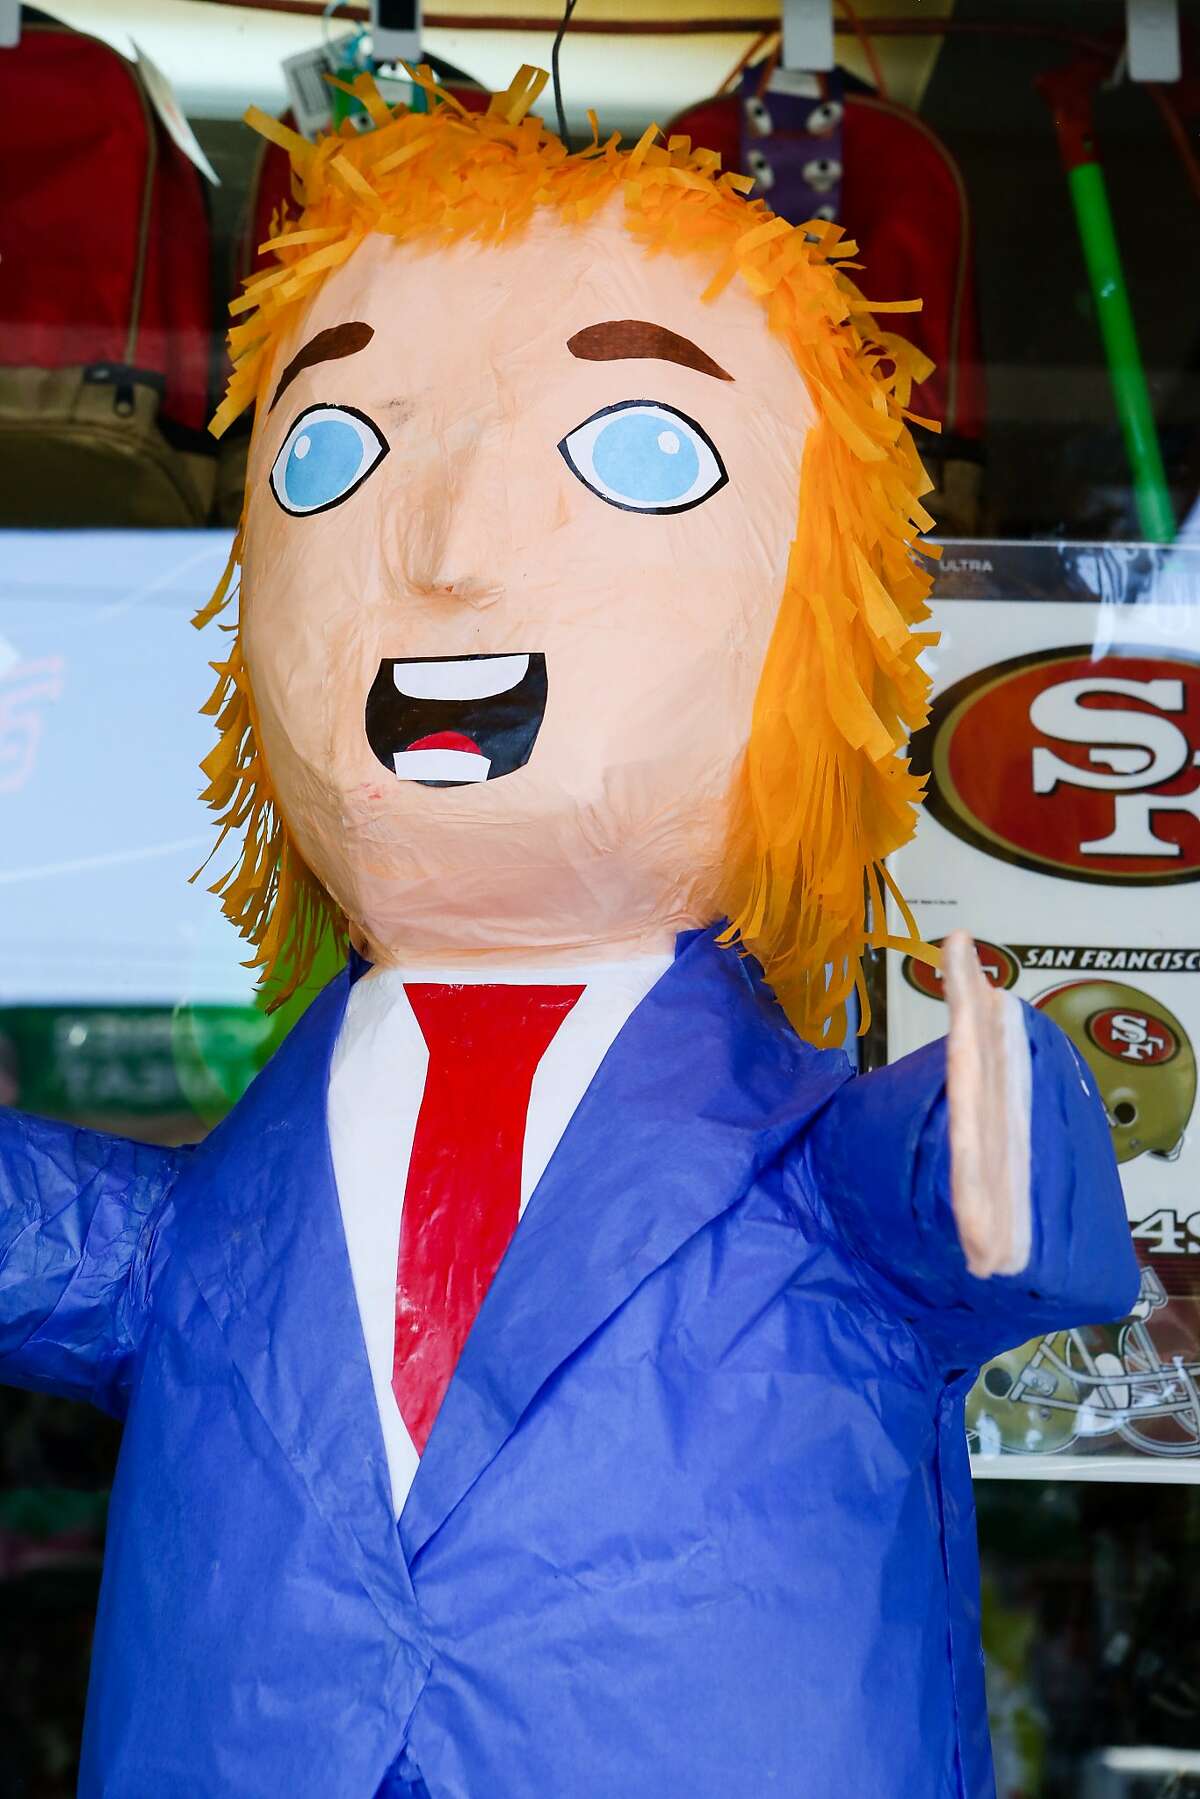 A Donald Trump pinata is on display San Francisco Tropical on Mission Street on Thursday, August 27. 2015 in San Francisco, Calif.